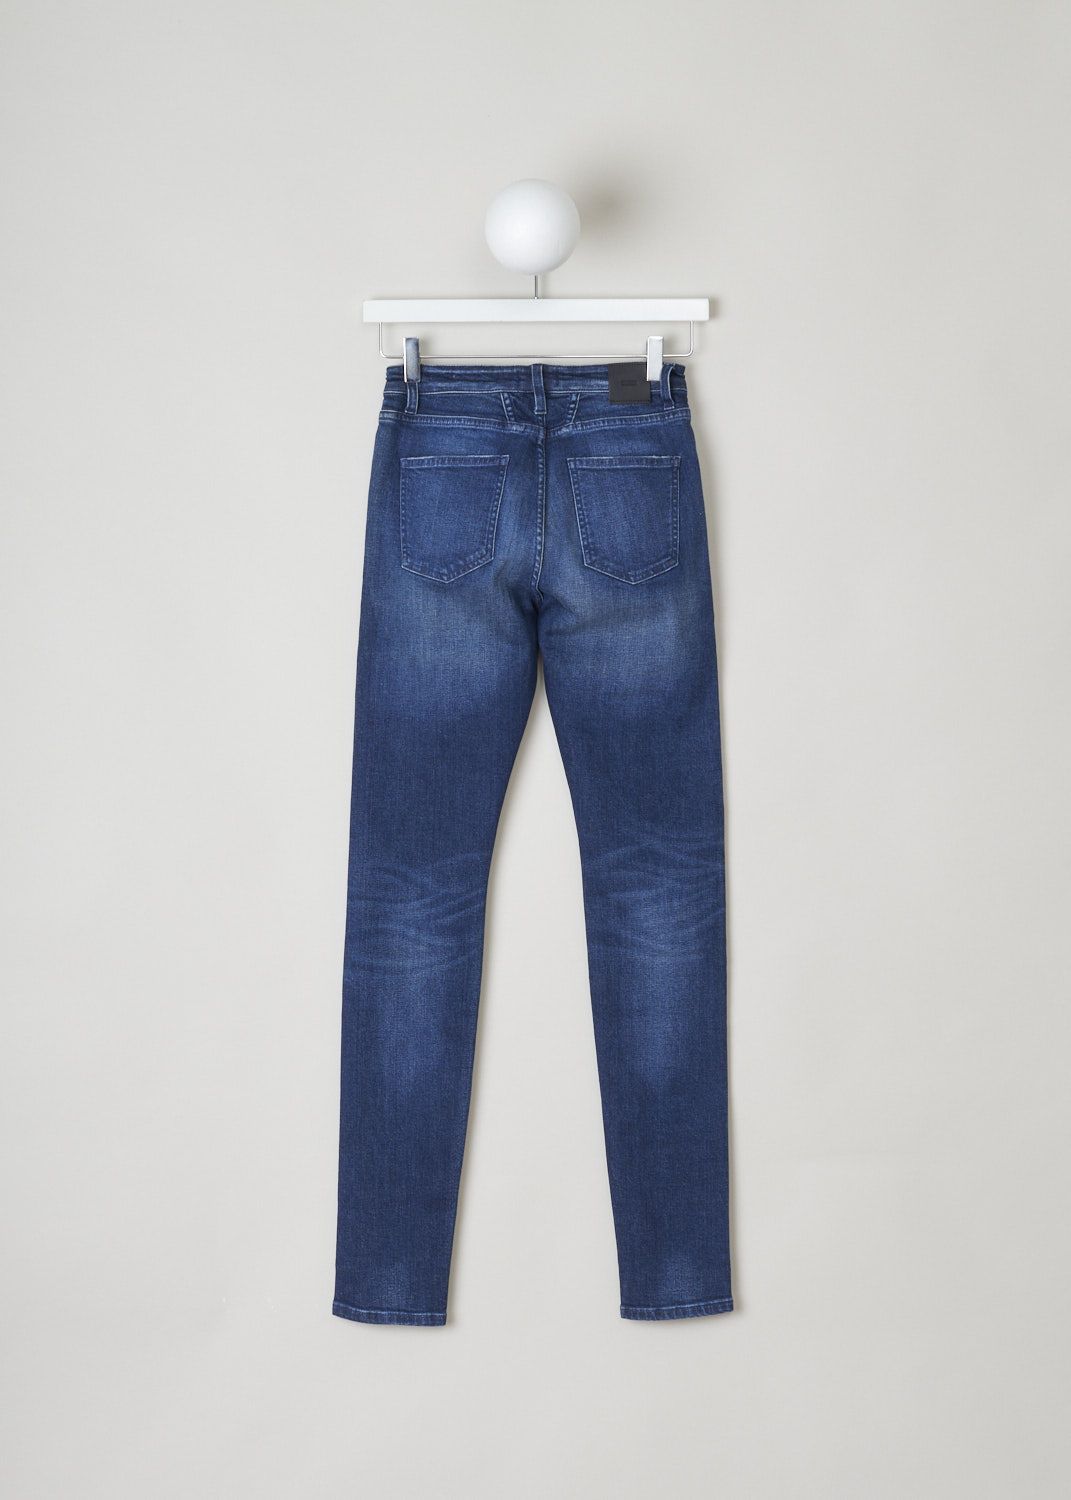 Closed, Mid-blue skinny high-waist lizzy jeans, lizzy_closed_C91099_006_6M_6M, blue, back, Mid-blue 5-pocket jeans comes in a skinny, and high-waist fit. The cotton blend used for this model is know for its high elasticity.